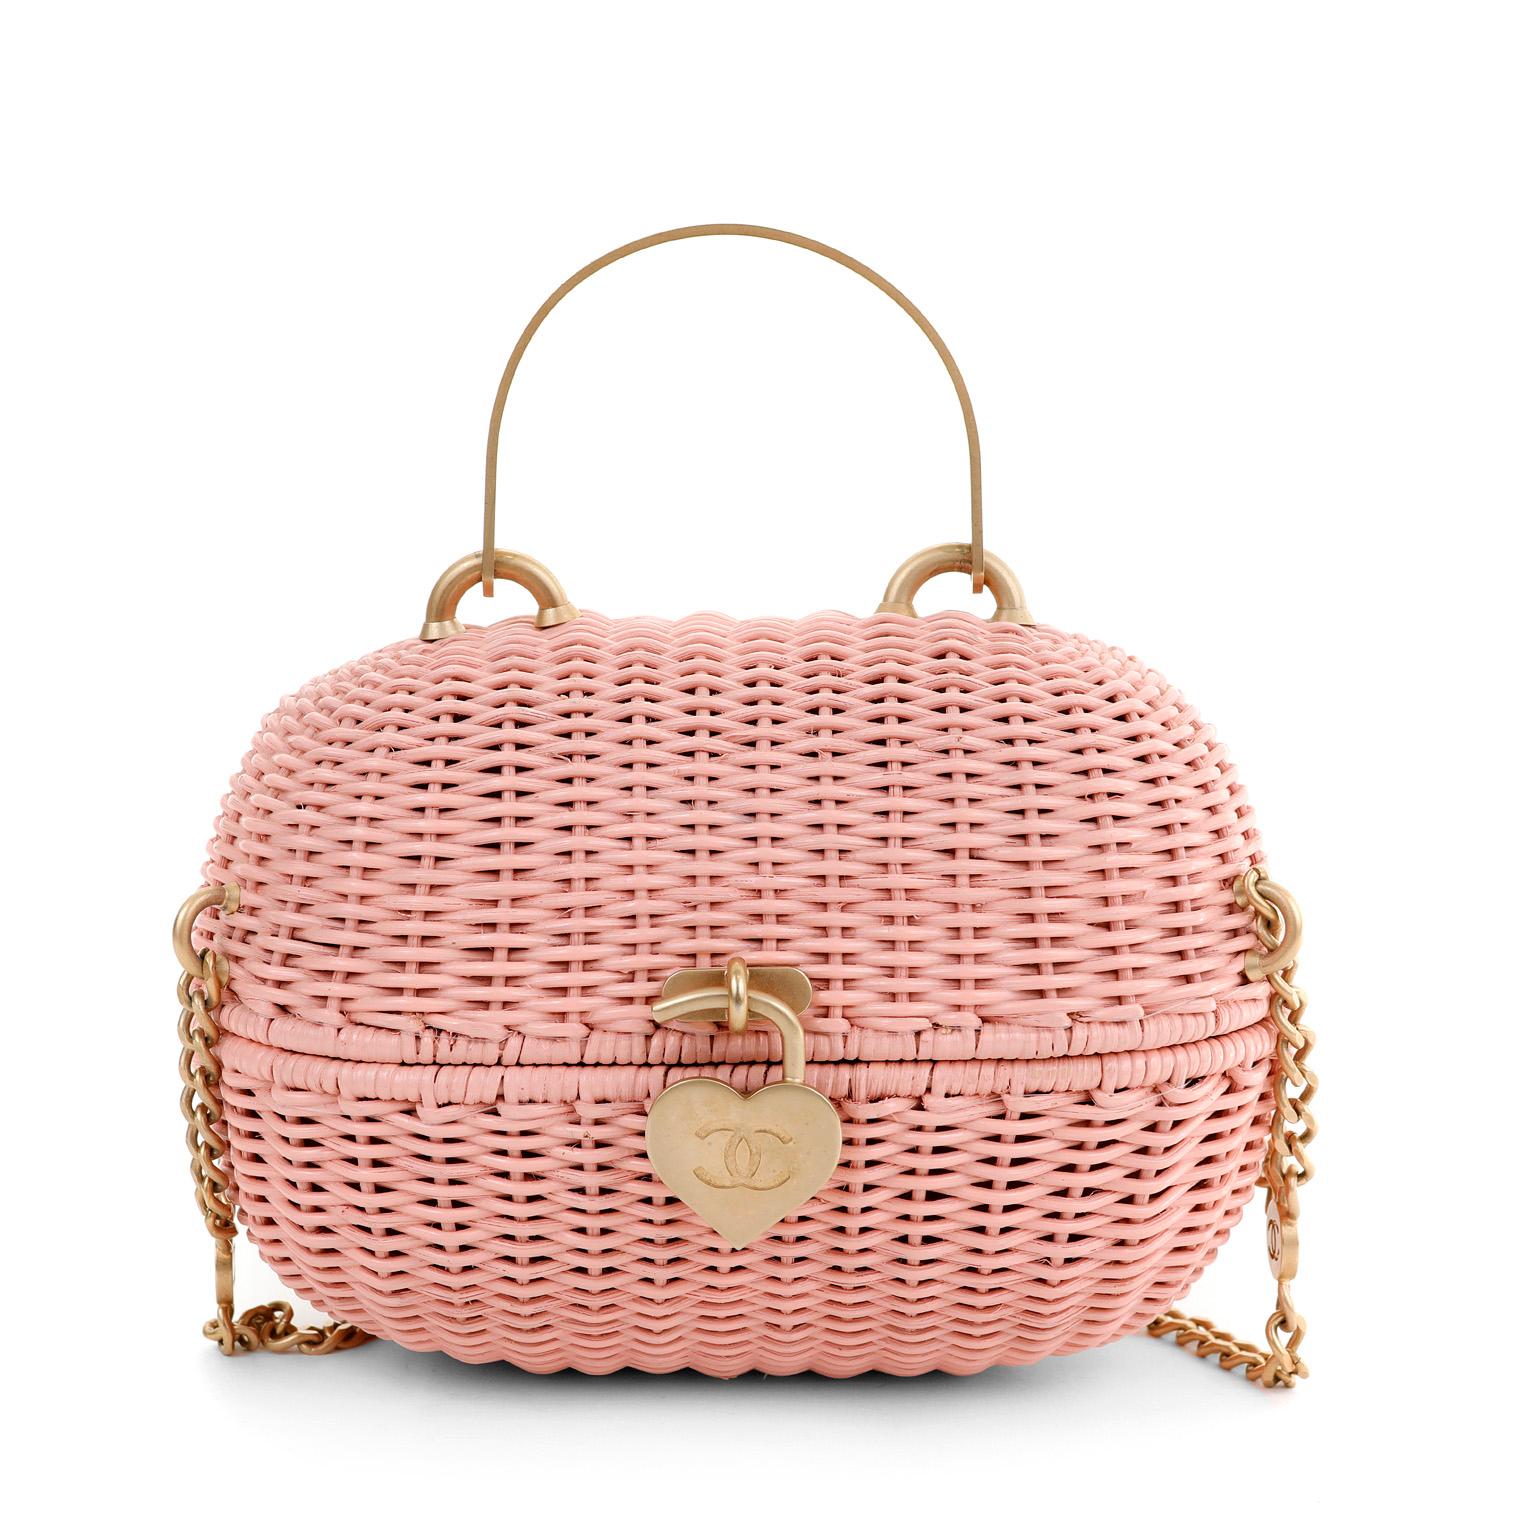 This authentic Chanel Pink Wicker Love Basket Bag is a runway piece in pristine condition.  Oval shaped pink wicker basket with top handle and hinged top. Matte gold heart shaped locket and chain strap.  Dust bag included.

PBF 13189